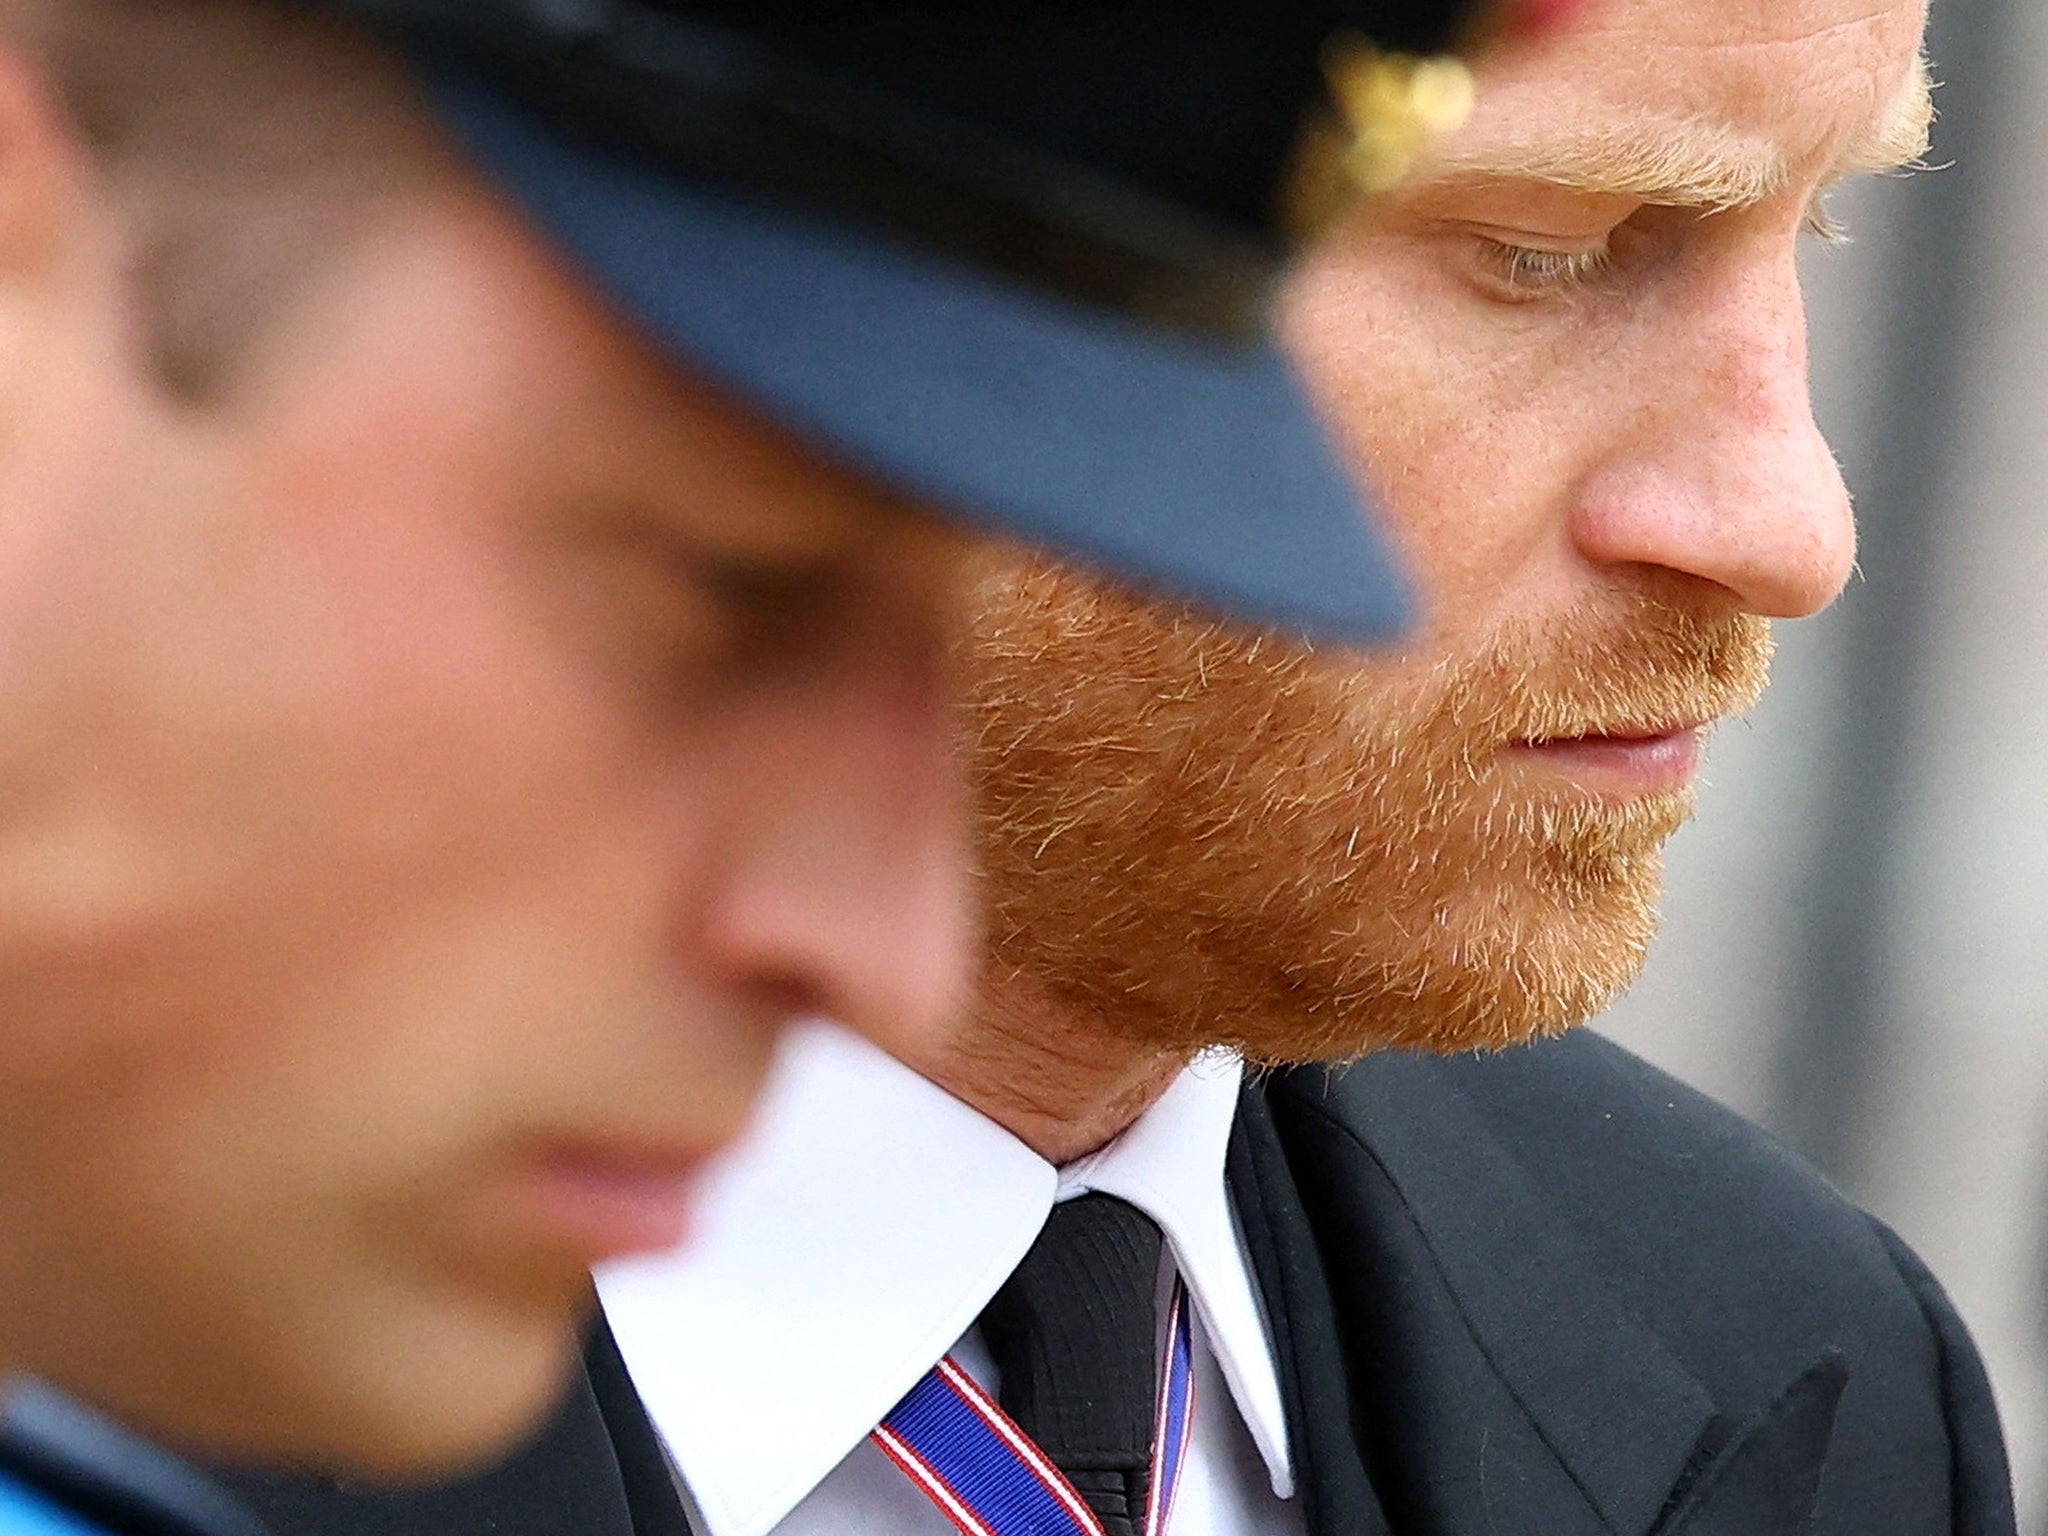 The problems between William and Harry may be beyond resolution